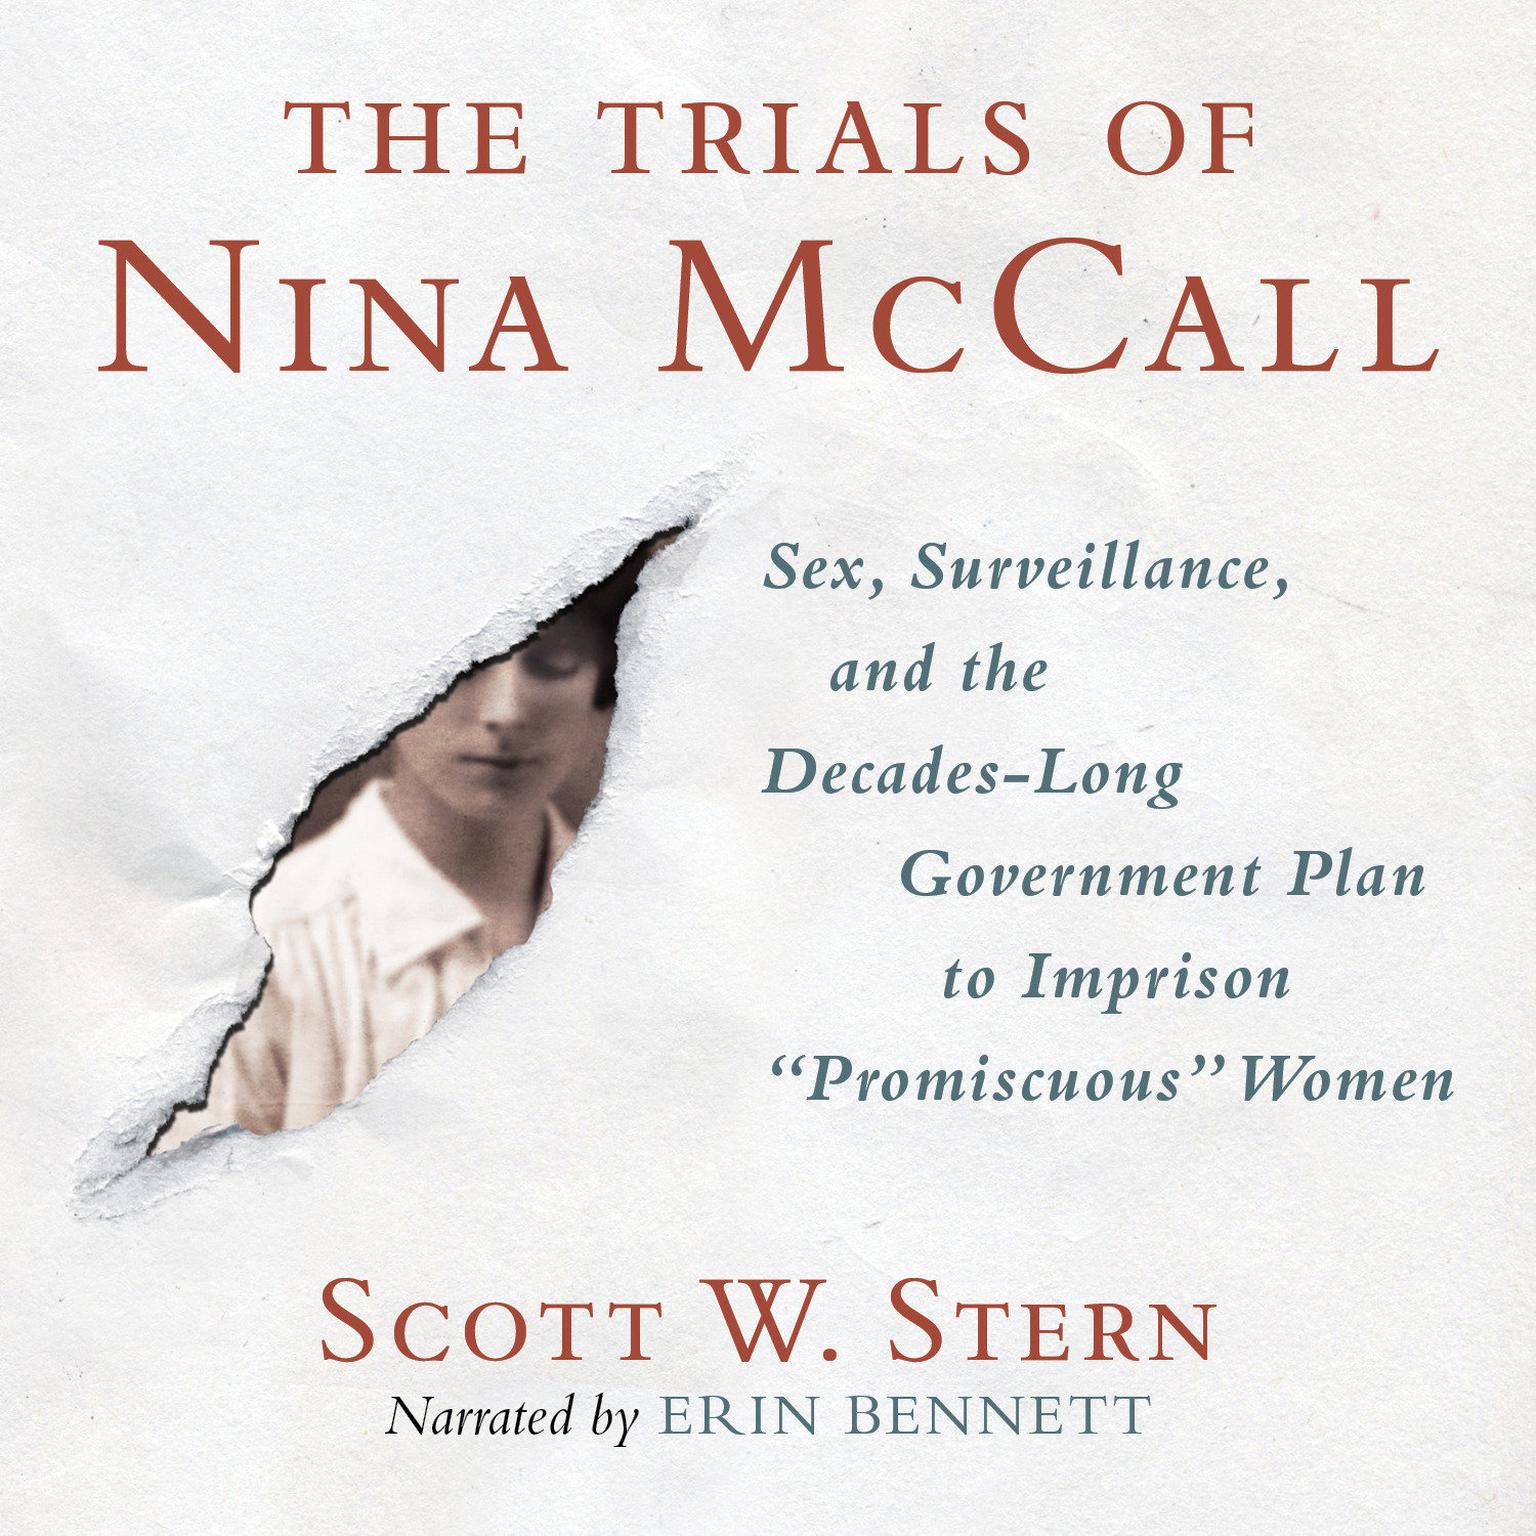 The Trials of Nina McCall: Sex, Surveillance, and the Decades-Long Government Plan to Imprison Promiscuous Women Audiobook, by Scott W. Stern